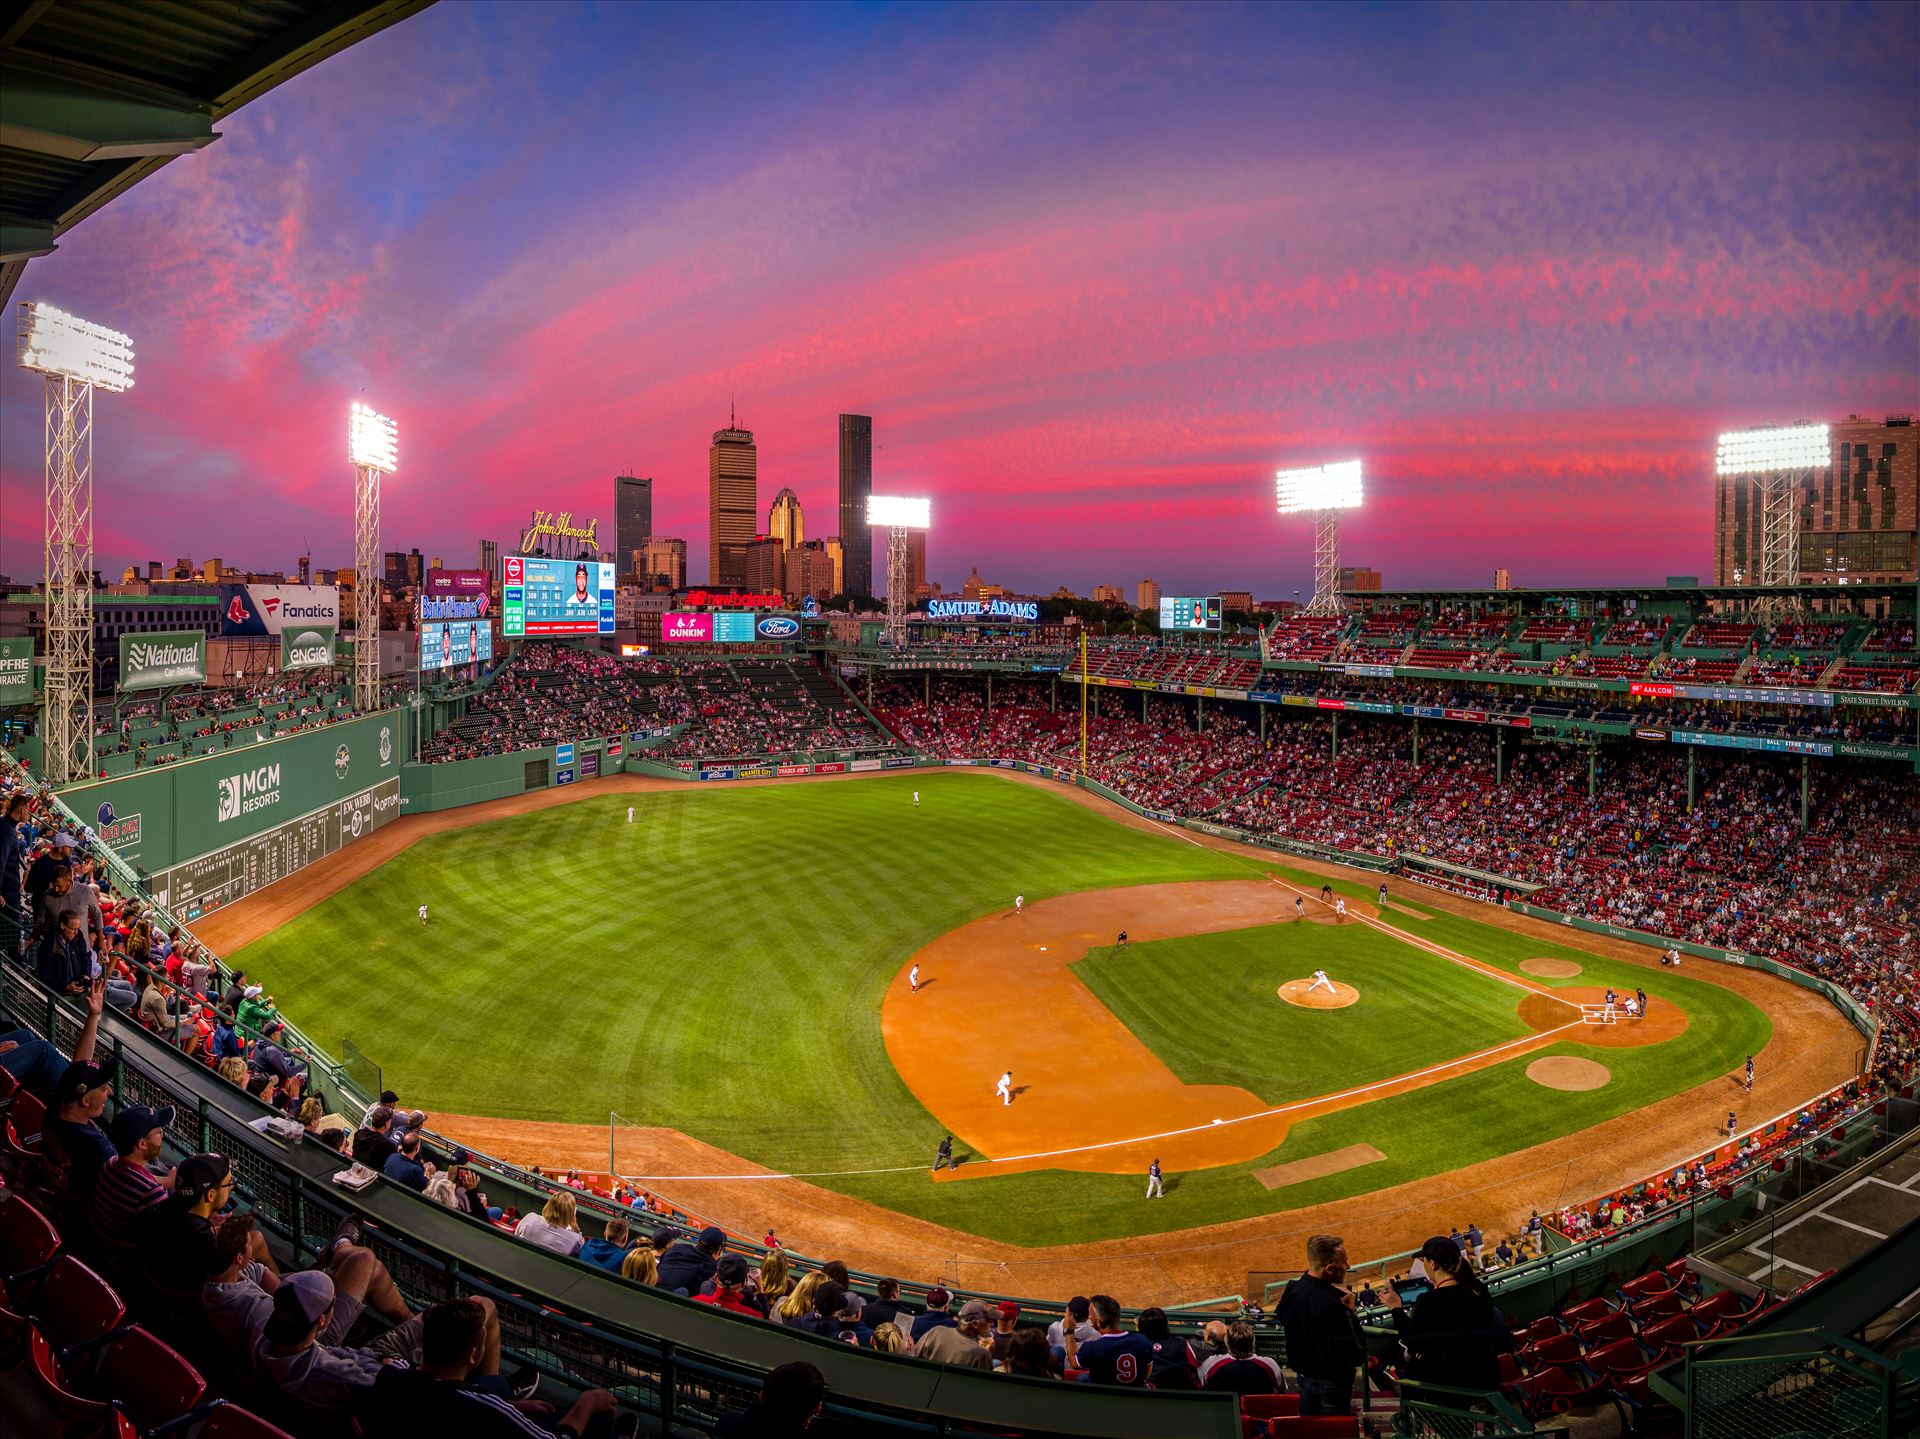 20190905-181523_[Red Sox game]_0009-0014_pano.jpg -  by New England Photography